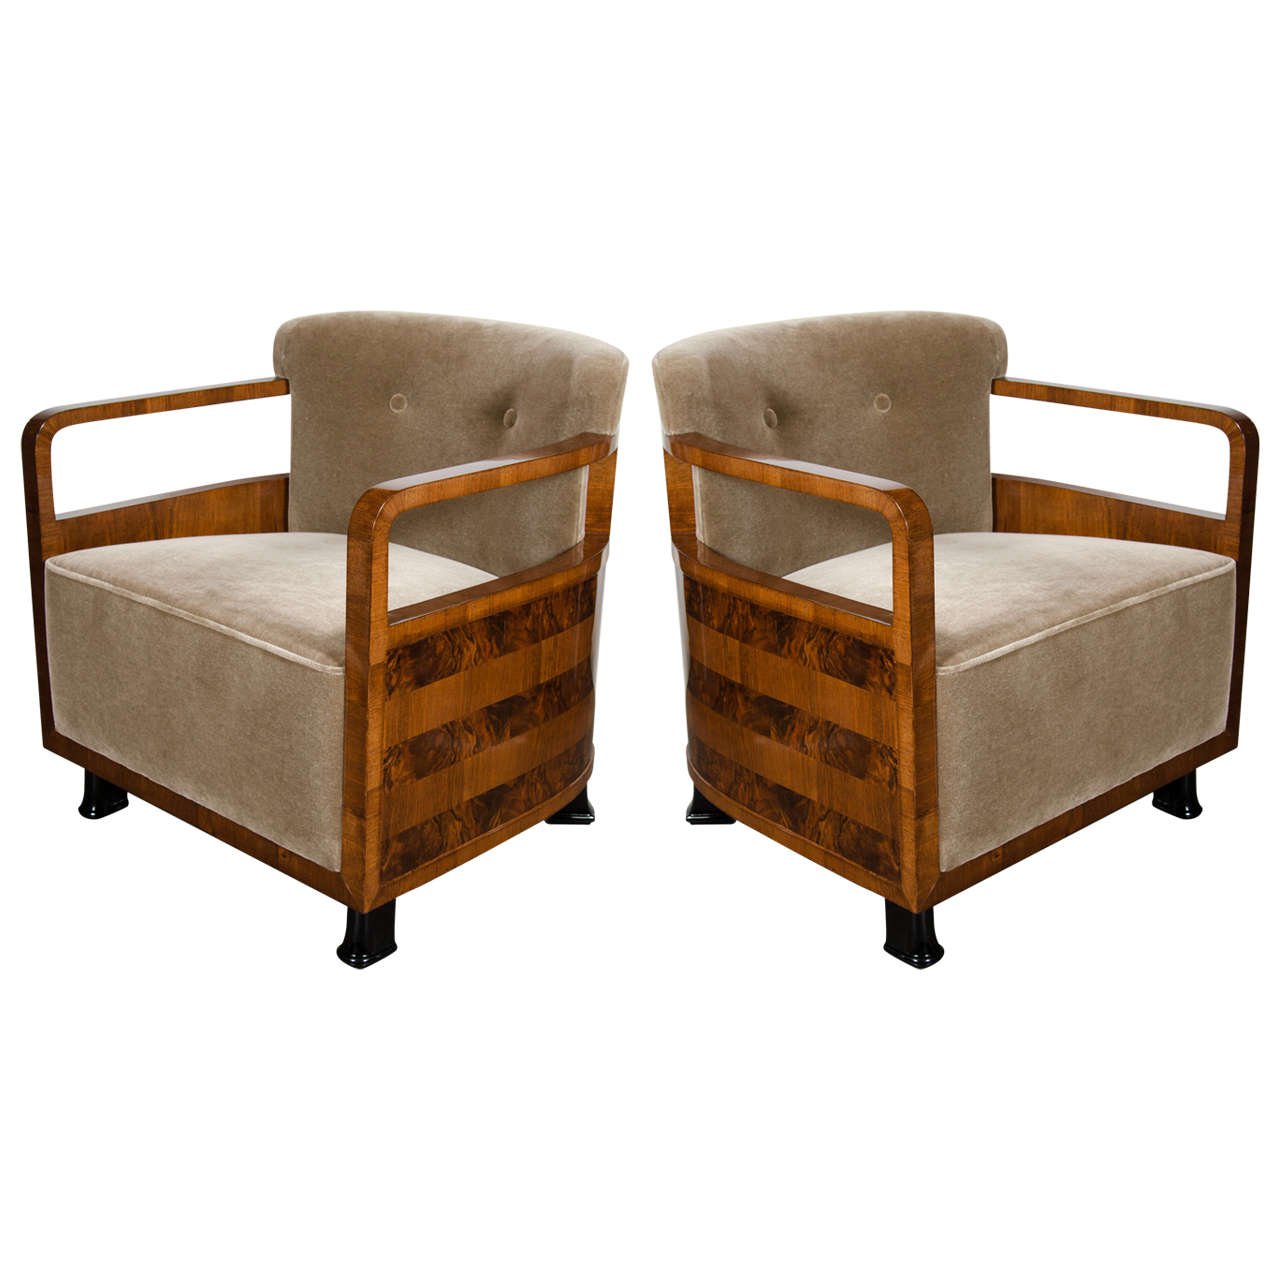 Pair of Art Deco Bauhaus Armchairs with Exotic Inlay and Mohair Upholstery